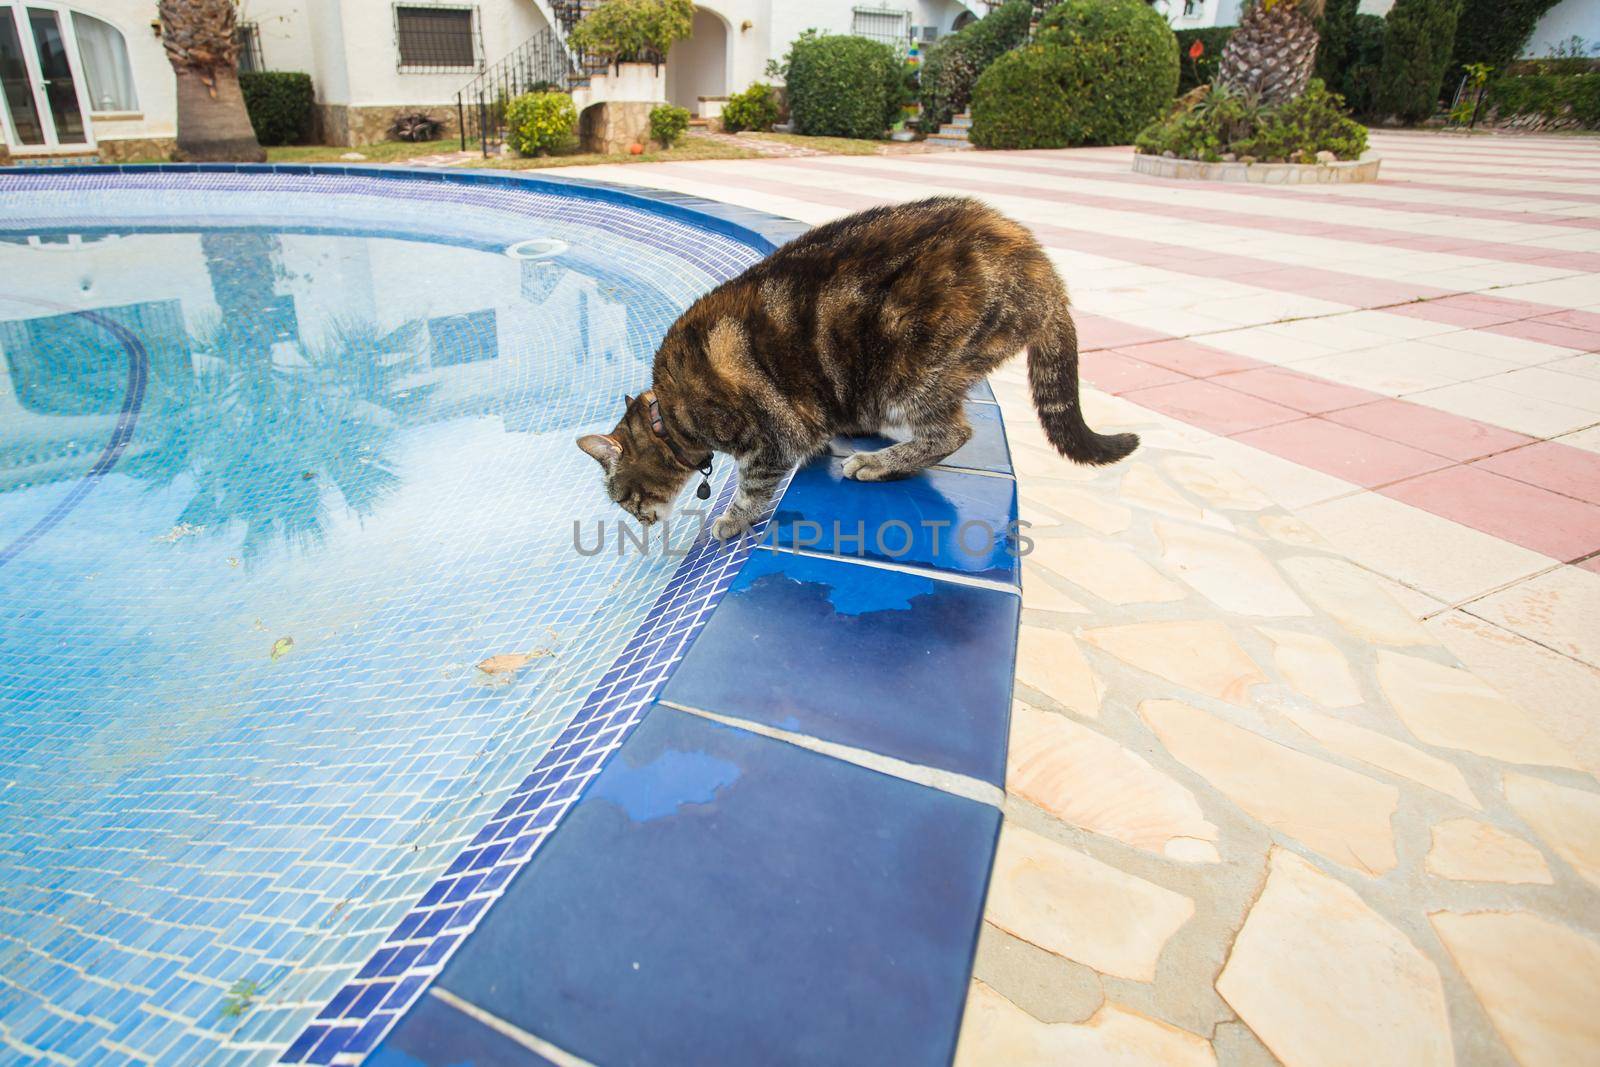 Cute cat drinking water from swimming pool by Satura86